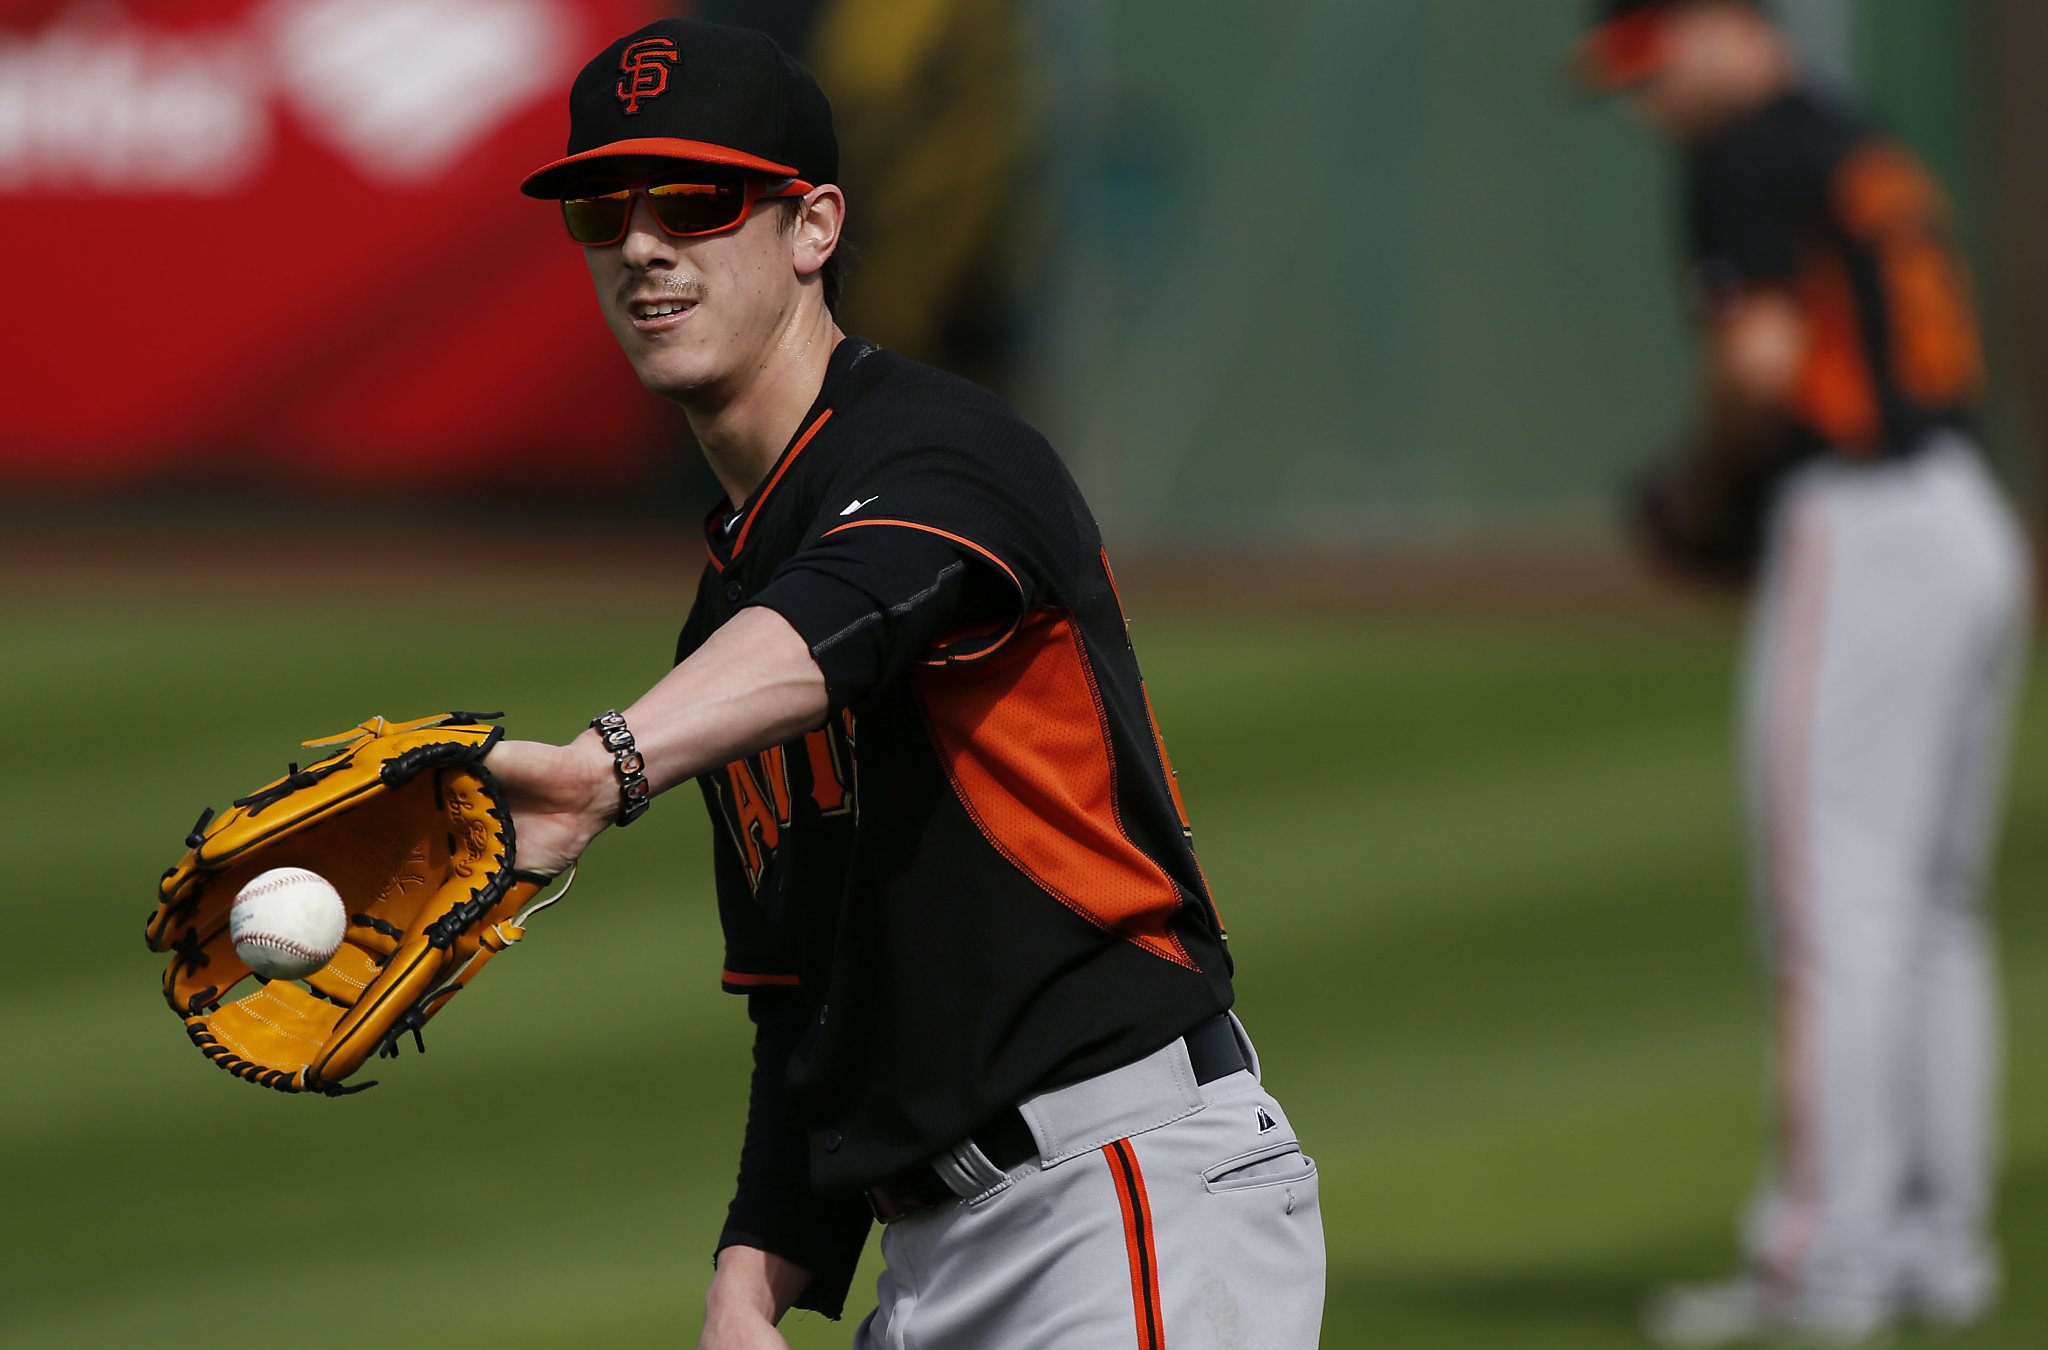 World Series: Giants' Tim Lincecum settles in after rough start